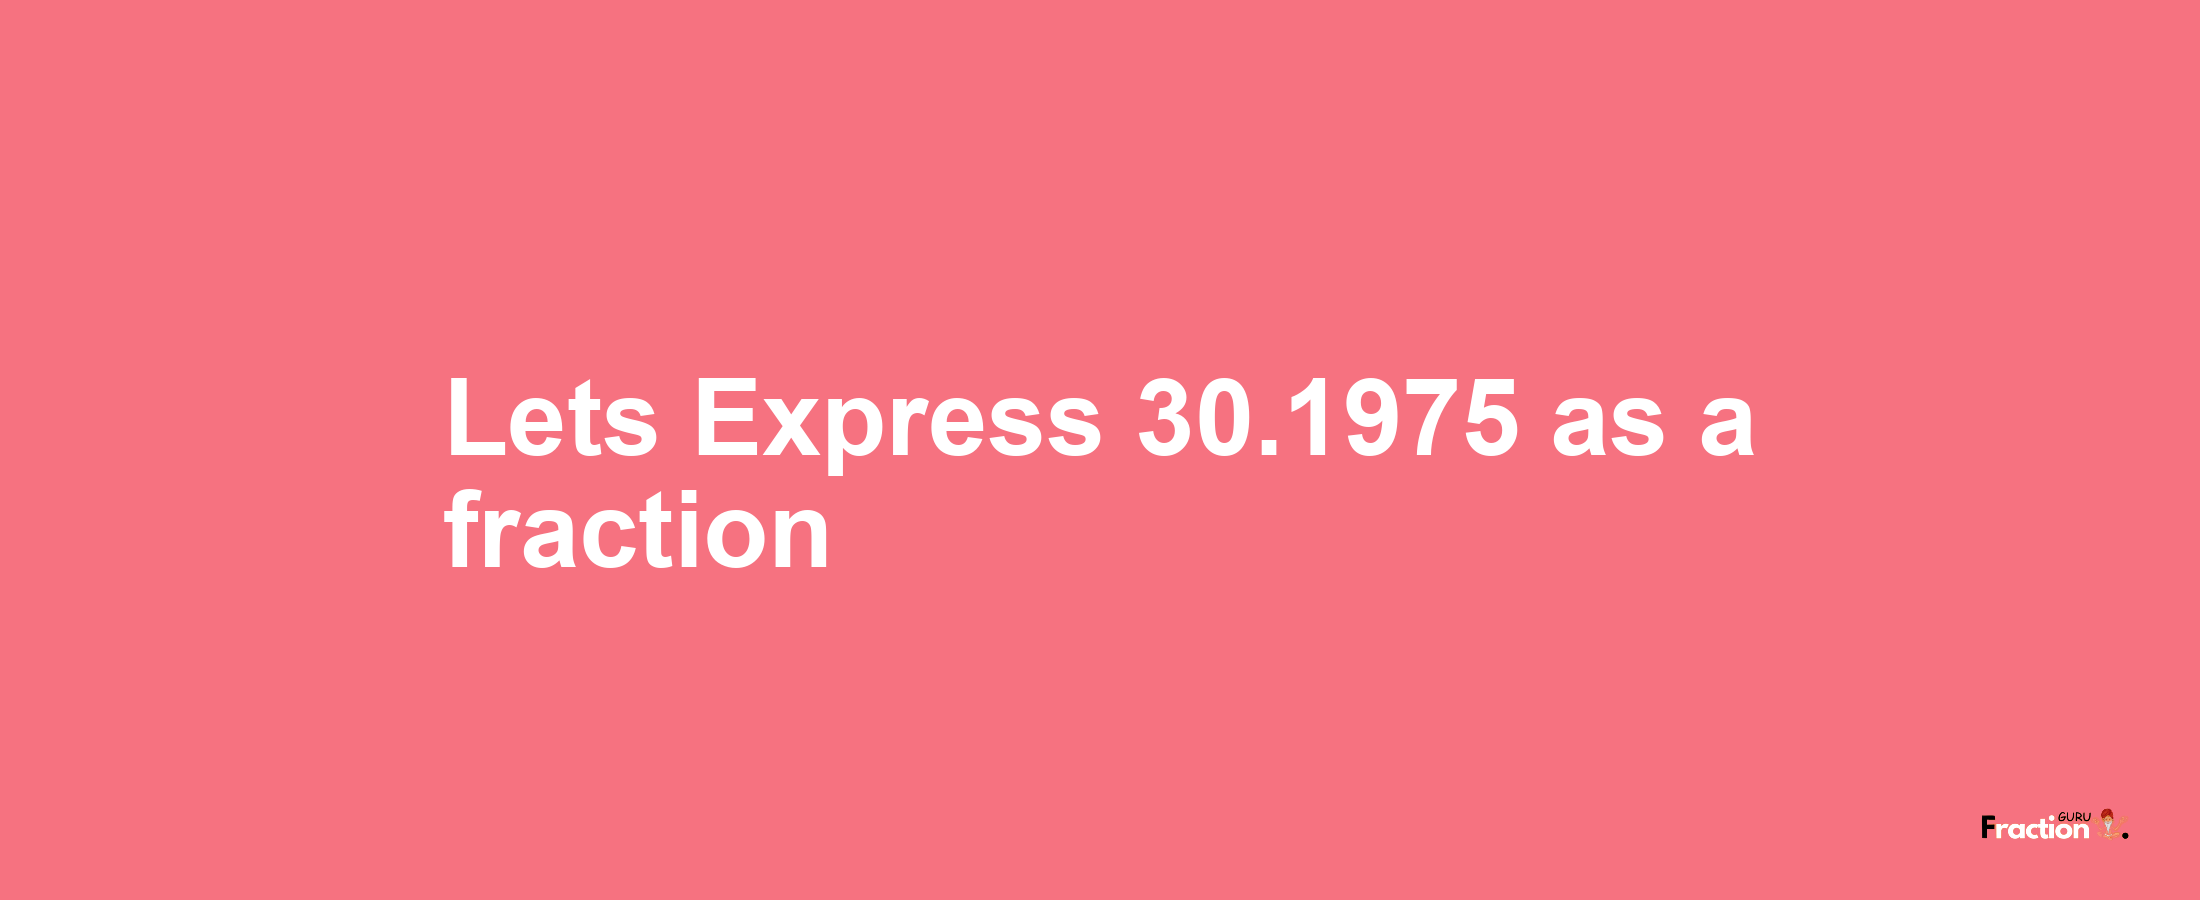 Lets Express 30.1975 as afraction